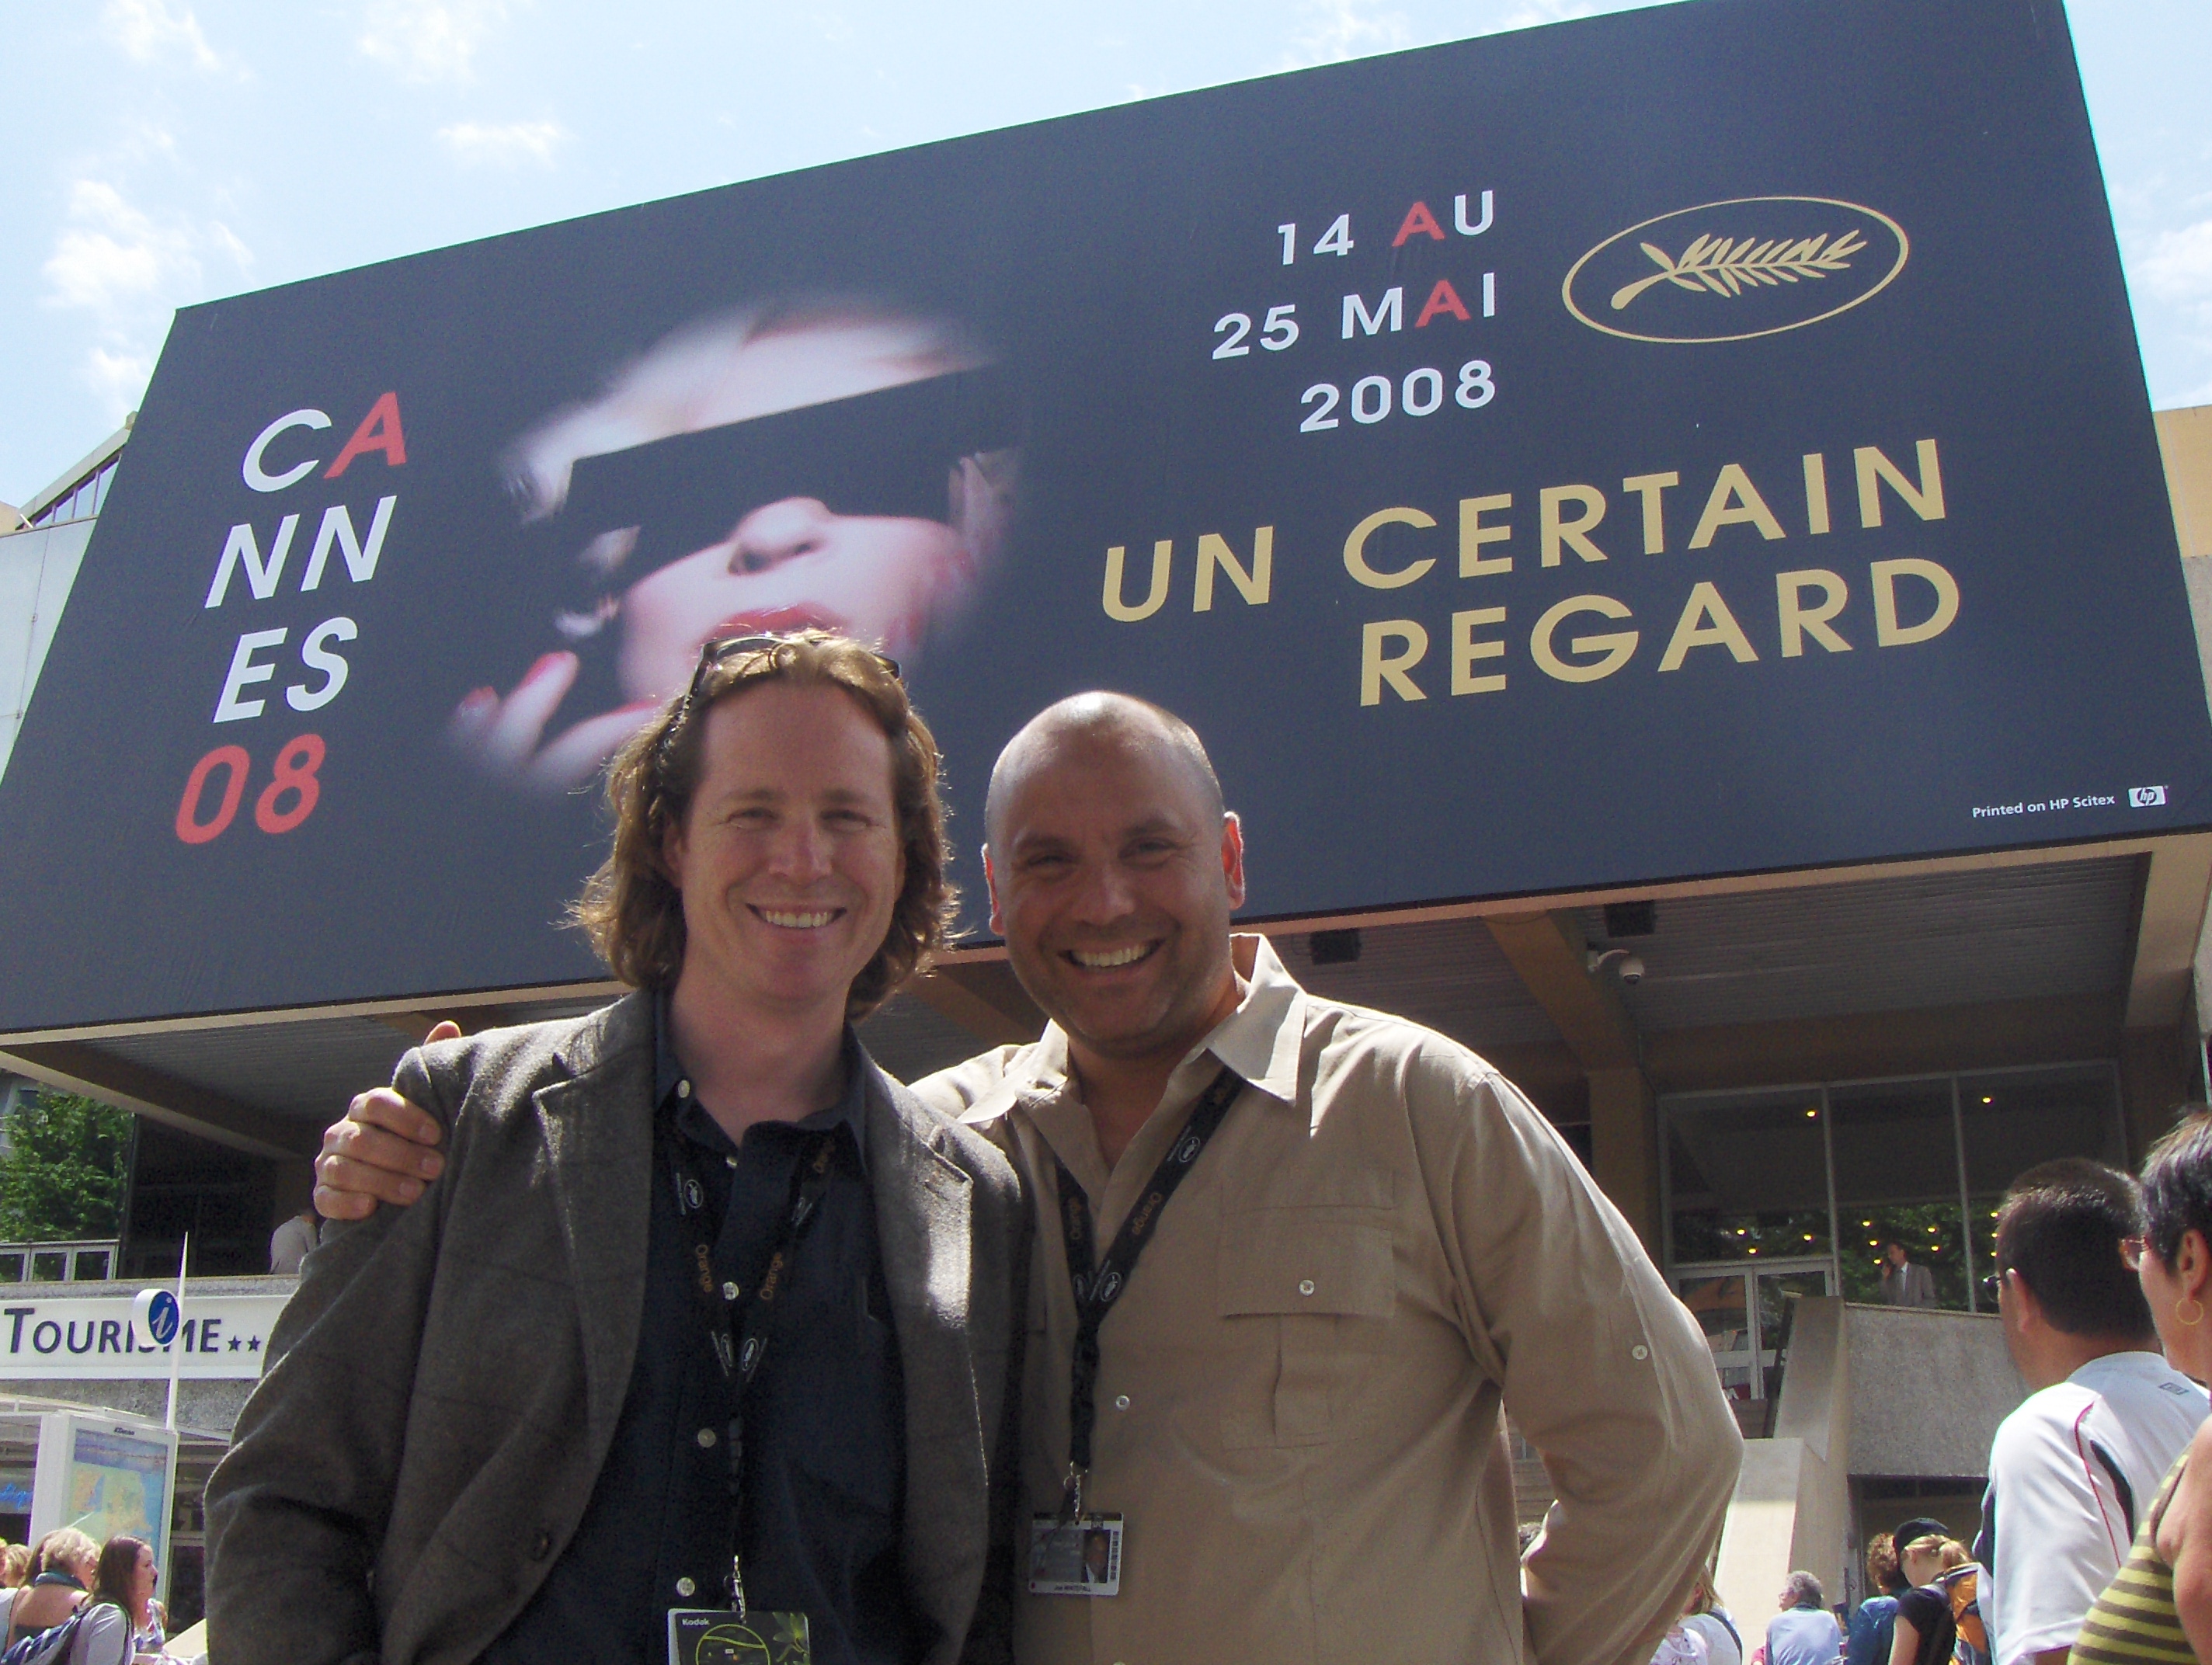 At Cannes with my Short Film, EXACT BUS FARE!